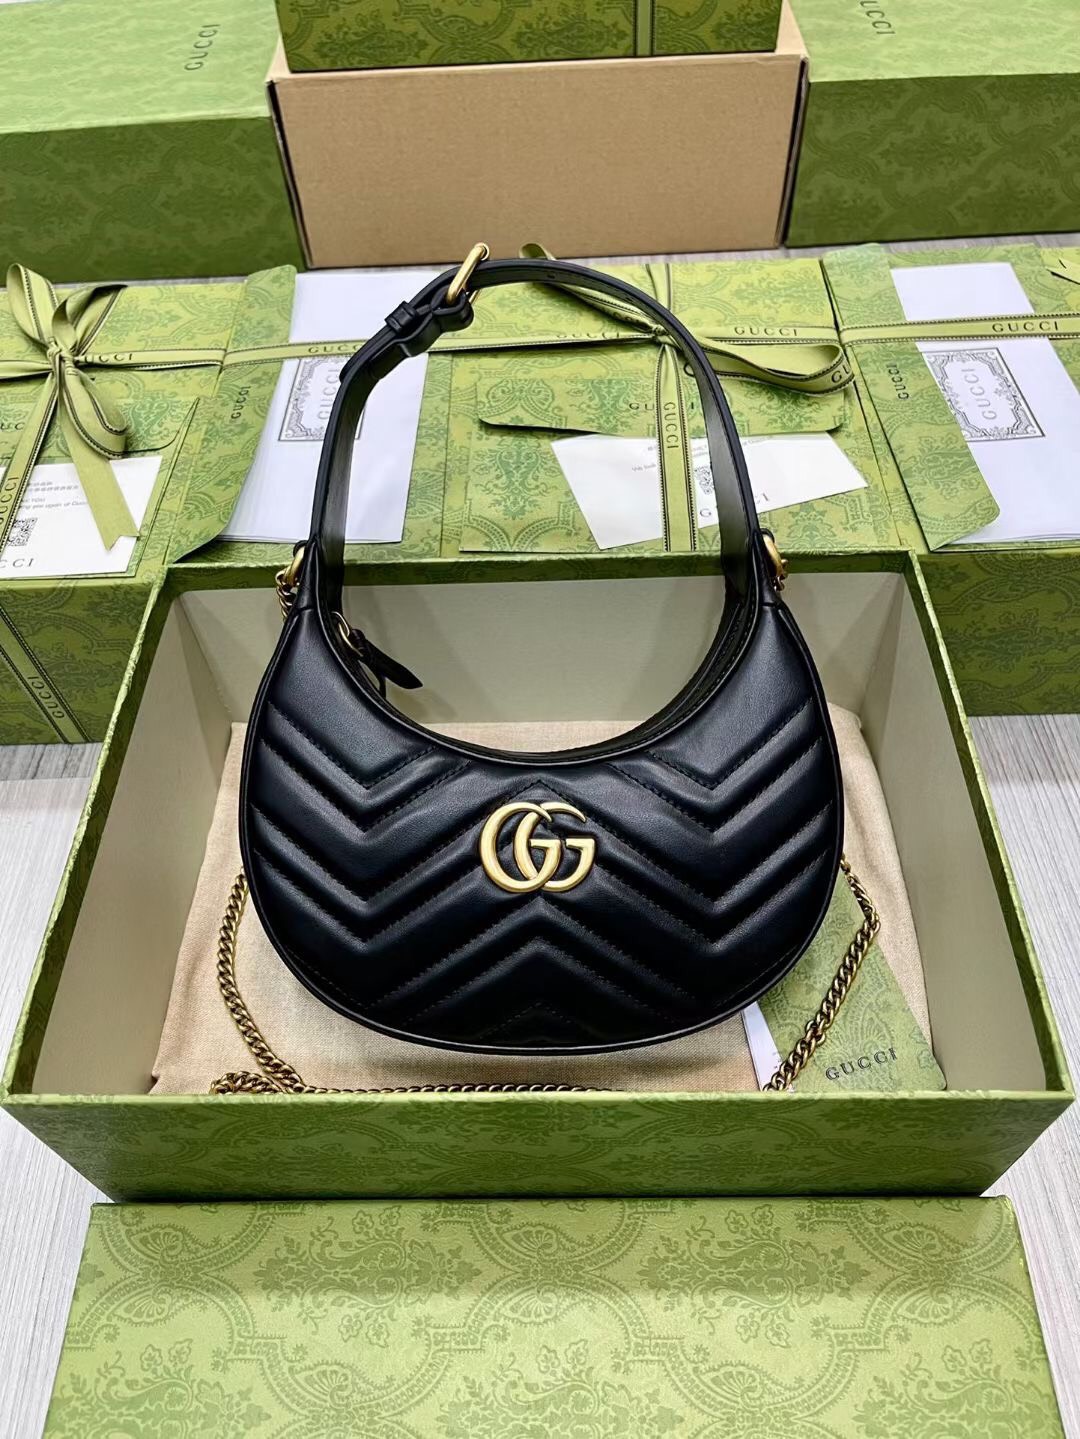 Gucci GG Marmont Half Moon Shoulder Bag 699514 - Replica Bags and Shoes ...